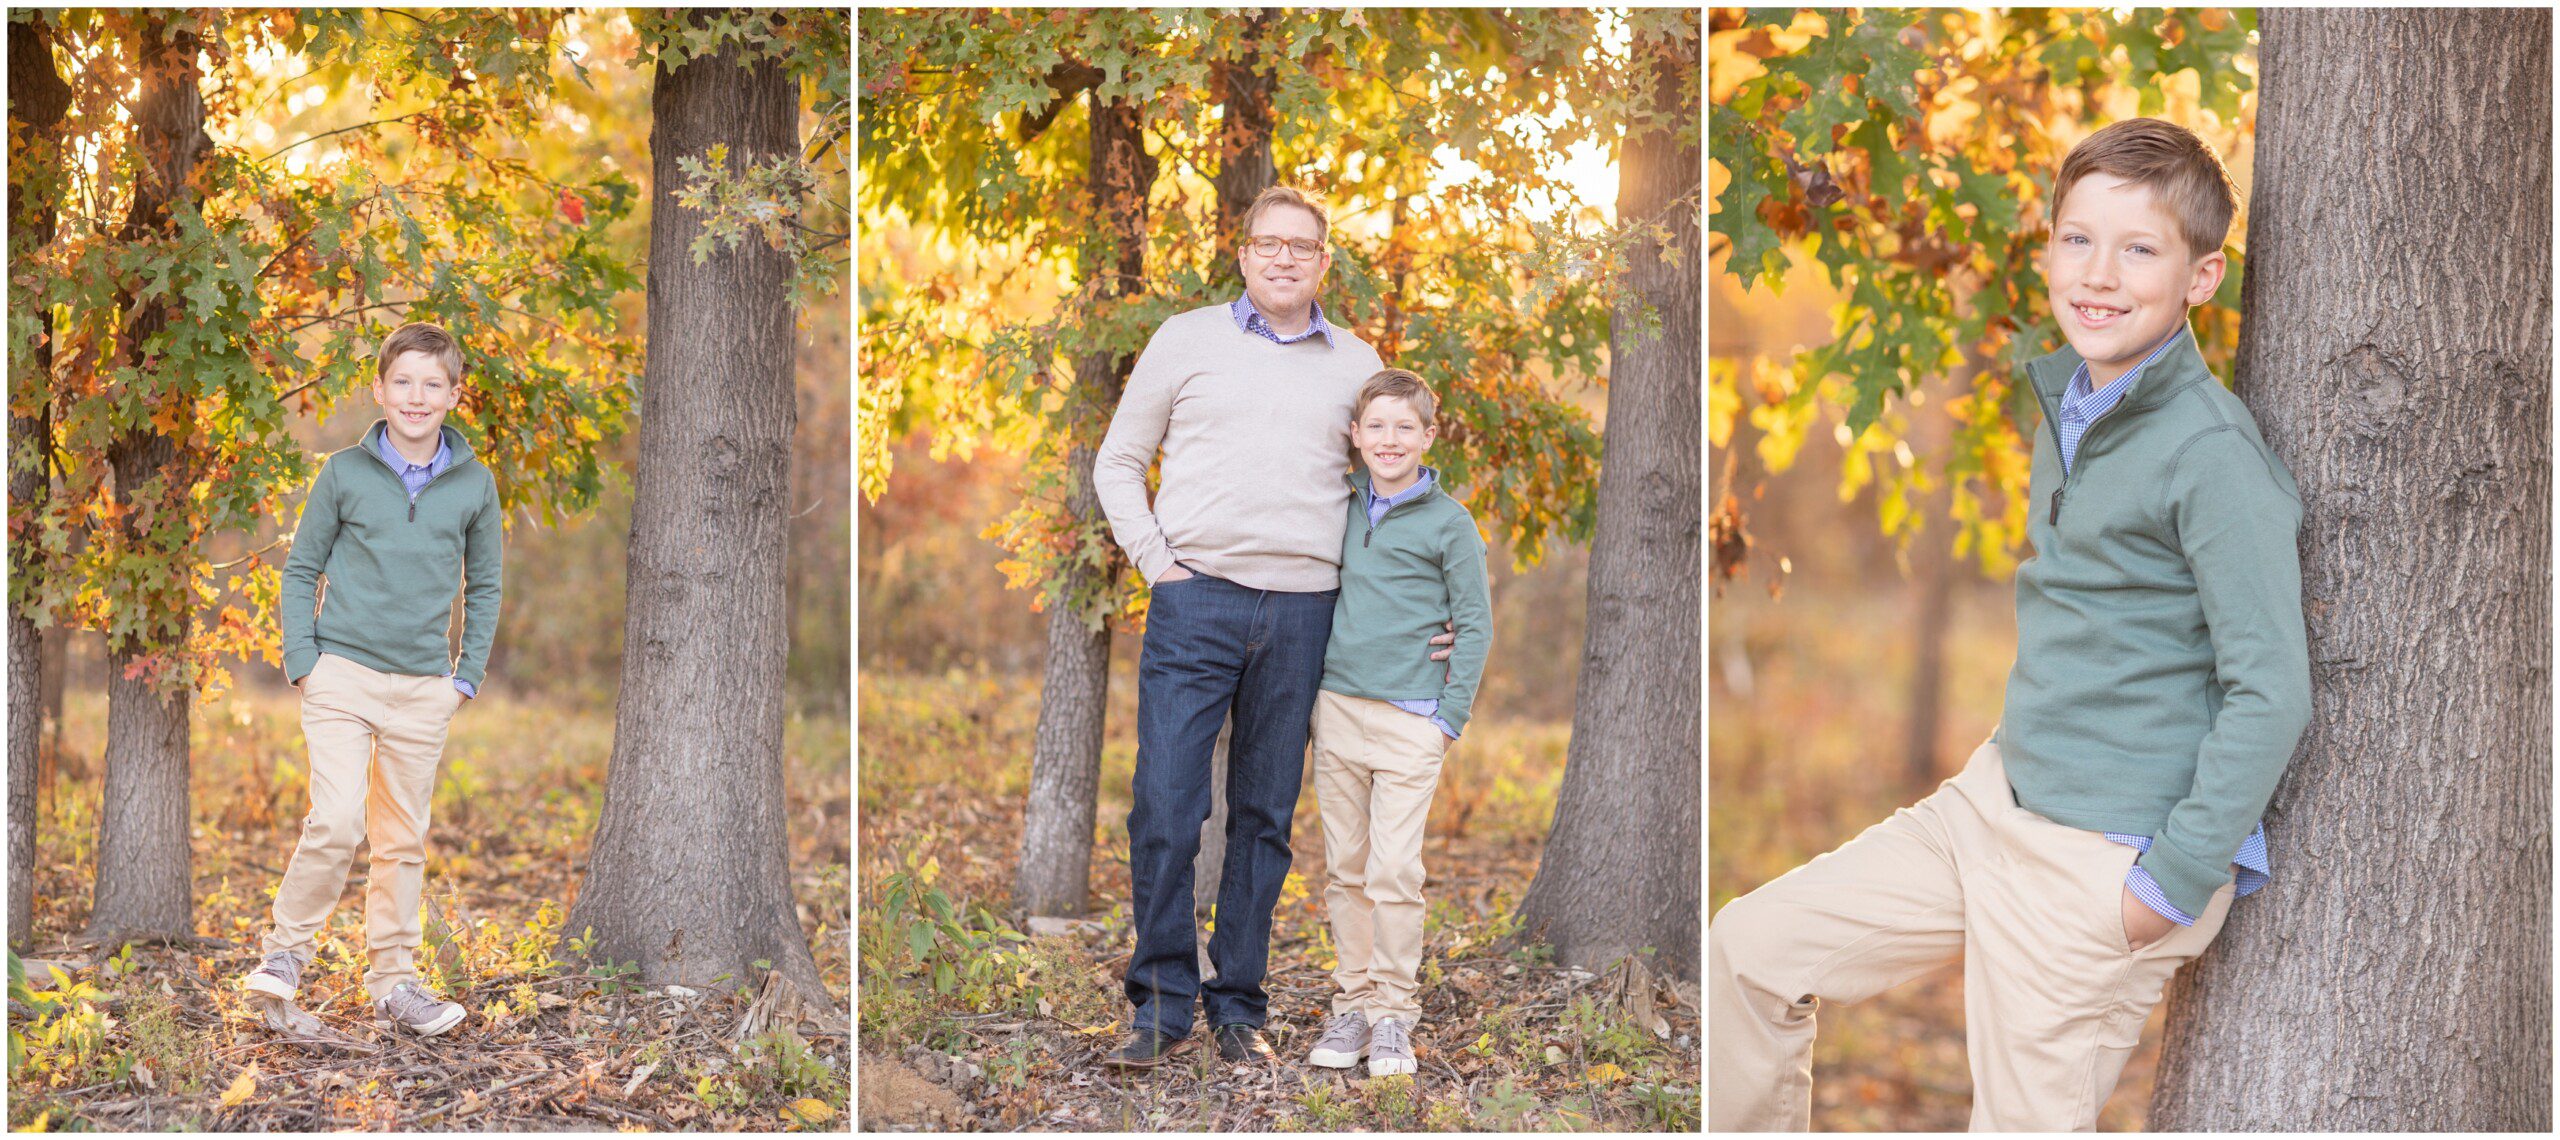 Father and son Autumn family pictures in St. Louis